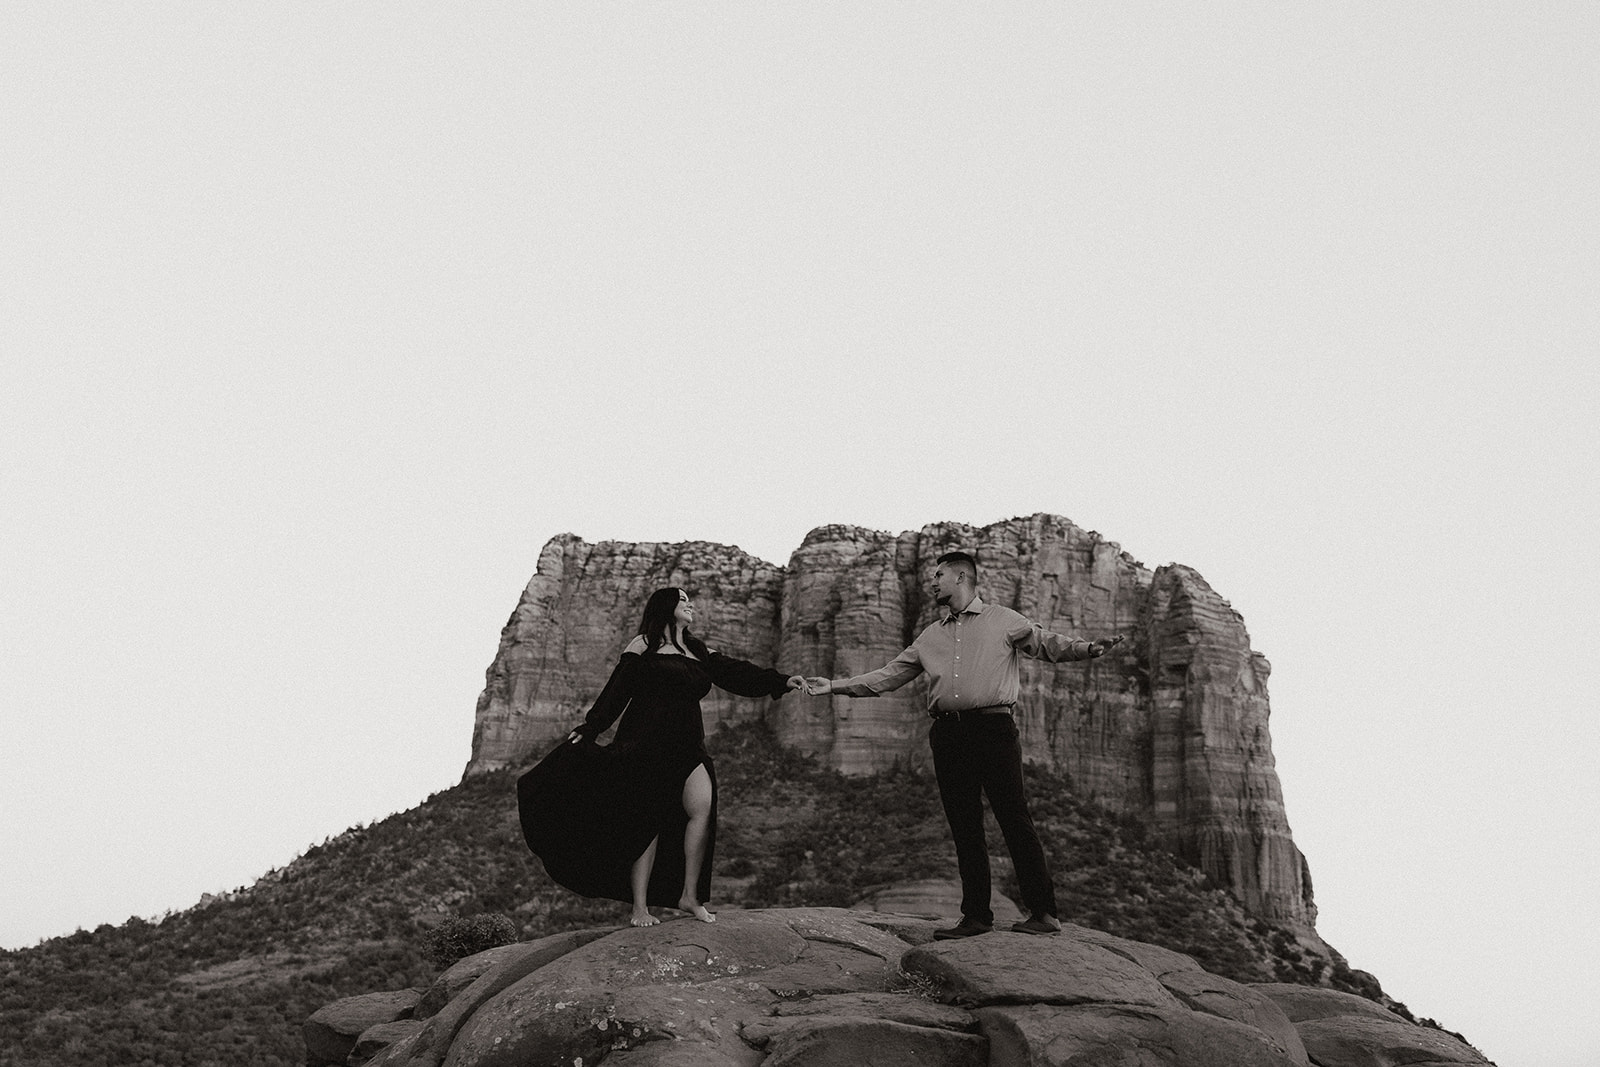 Stunning couple pose with the dreamy Arizona mountains in the background!